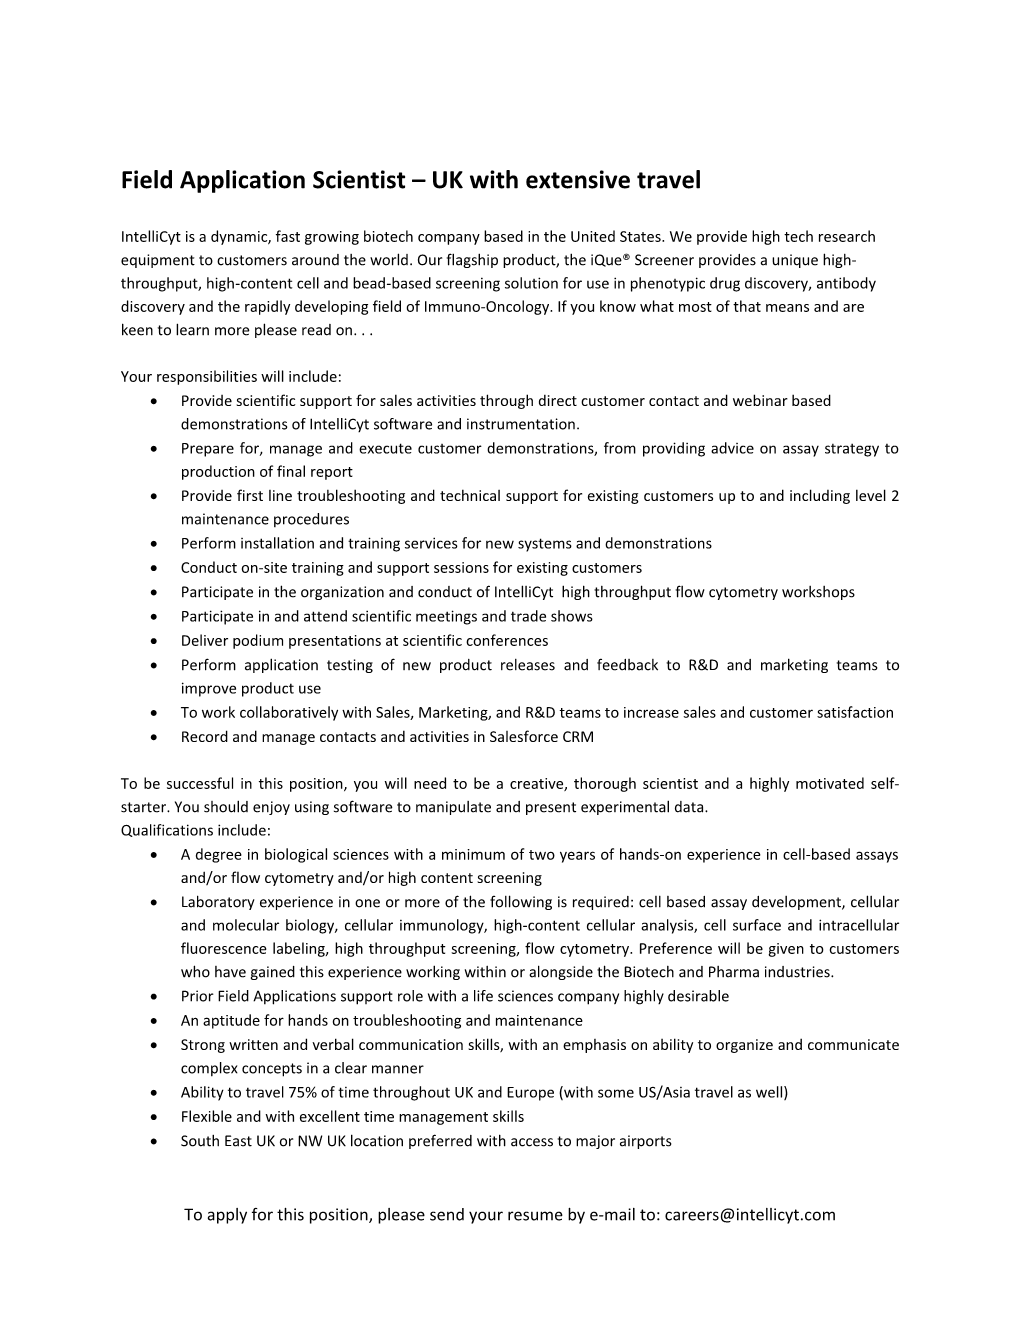 Field Application Scientist UK with Extensive Travel